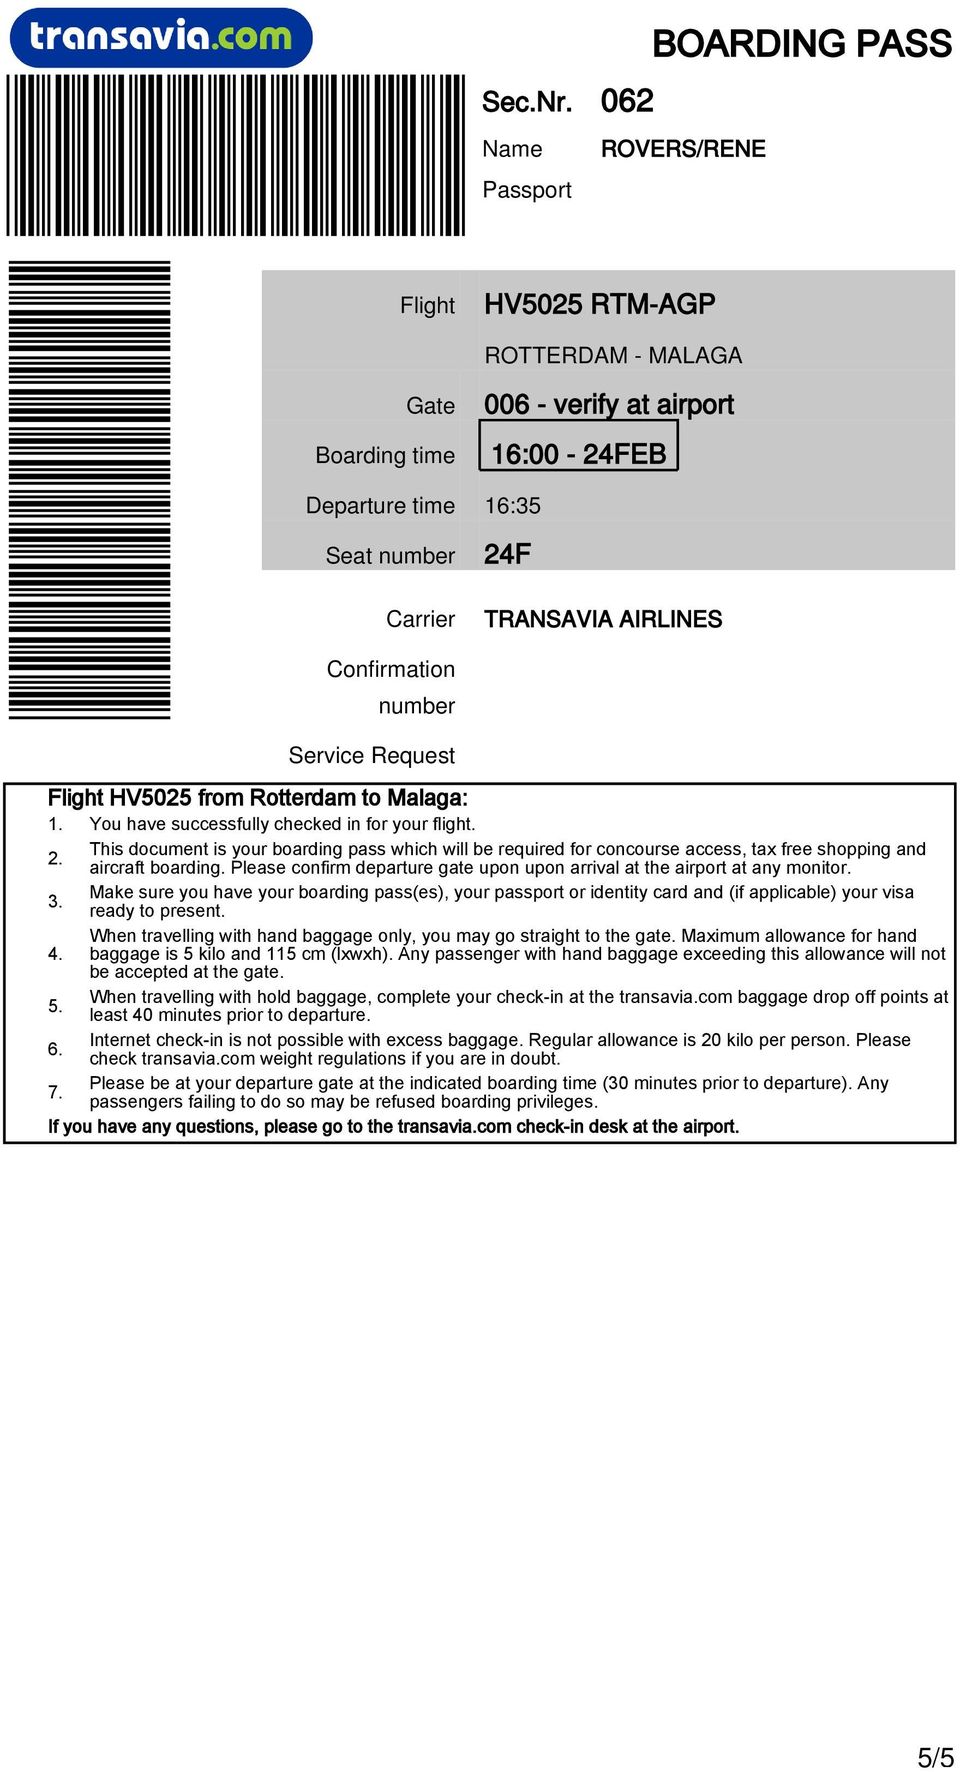 passenger with hand baggage exceeding this allowance will not be accepted at the gate 5 When travelling with hold baggage, complete your check-in at the transaviacom baggage drop off points at least